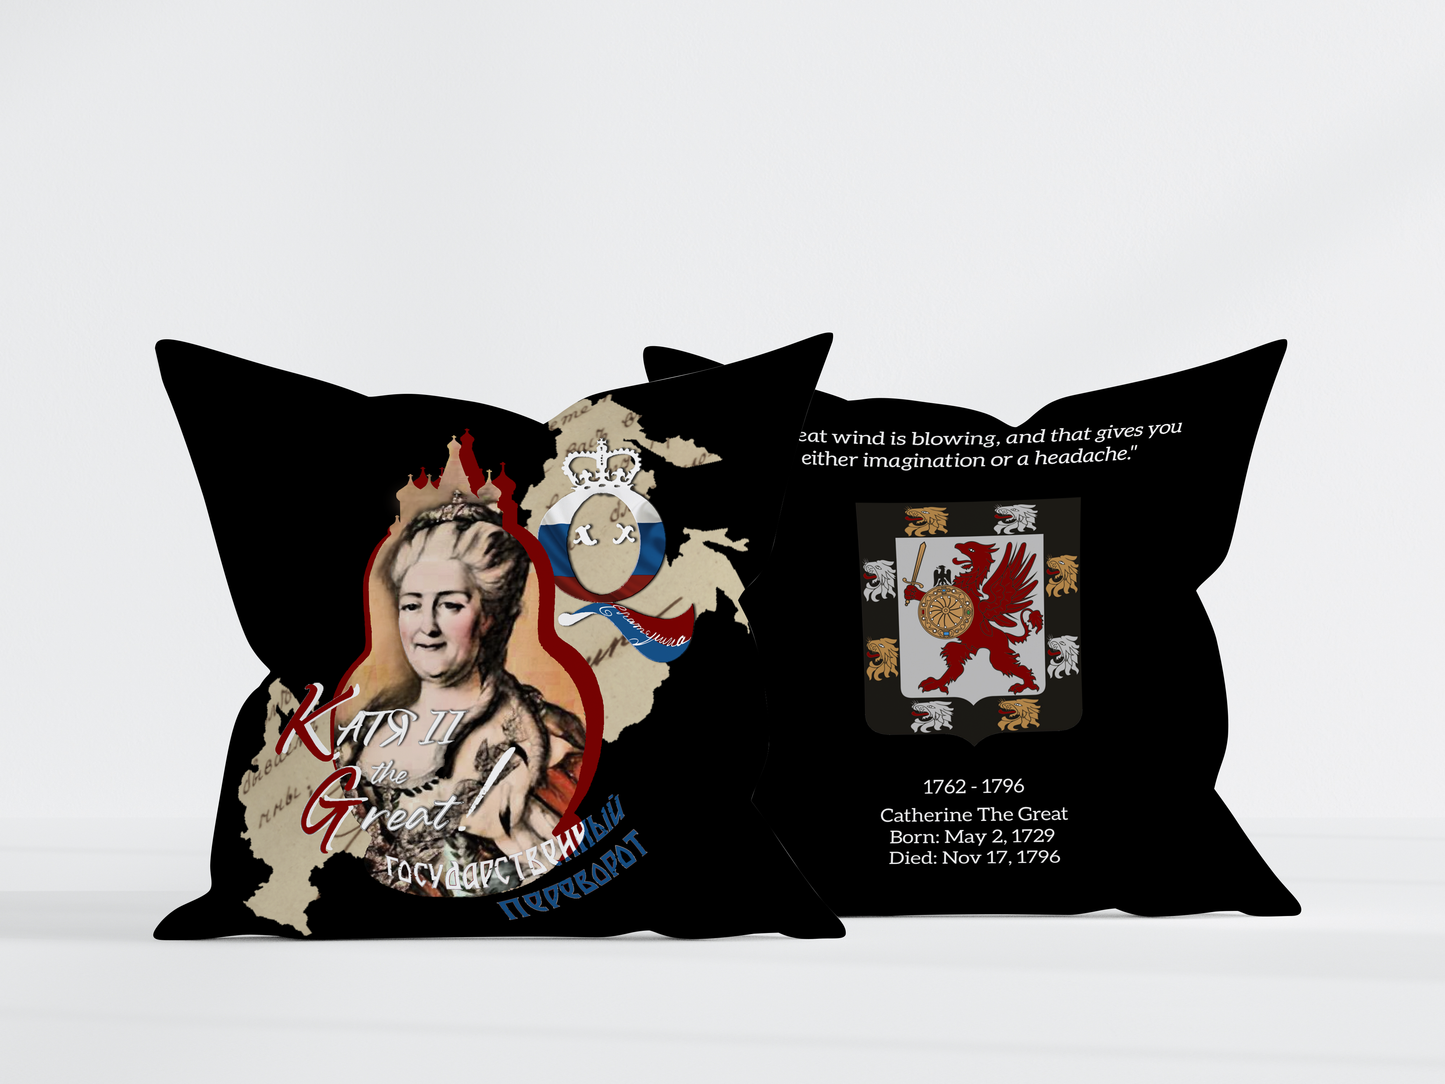 Catherine The Great Black Pillow 18x18